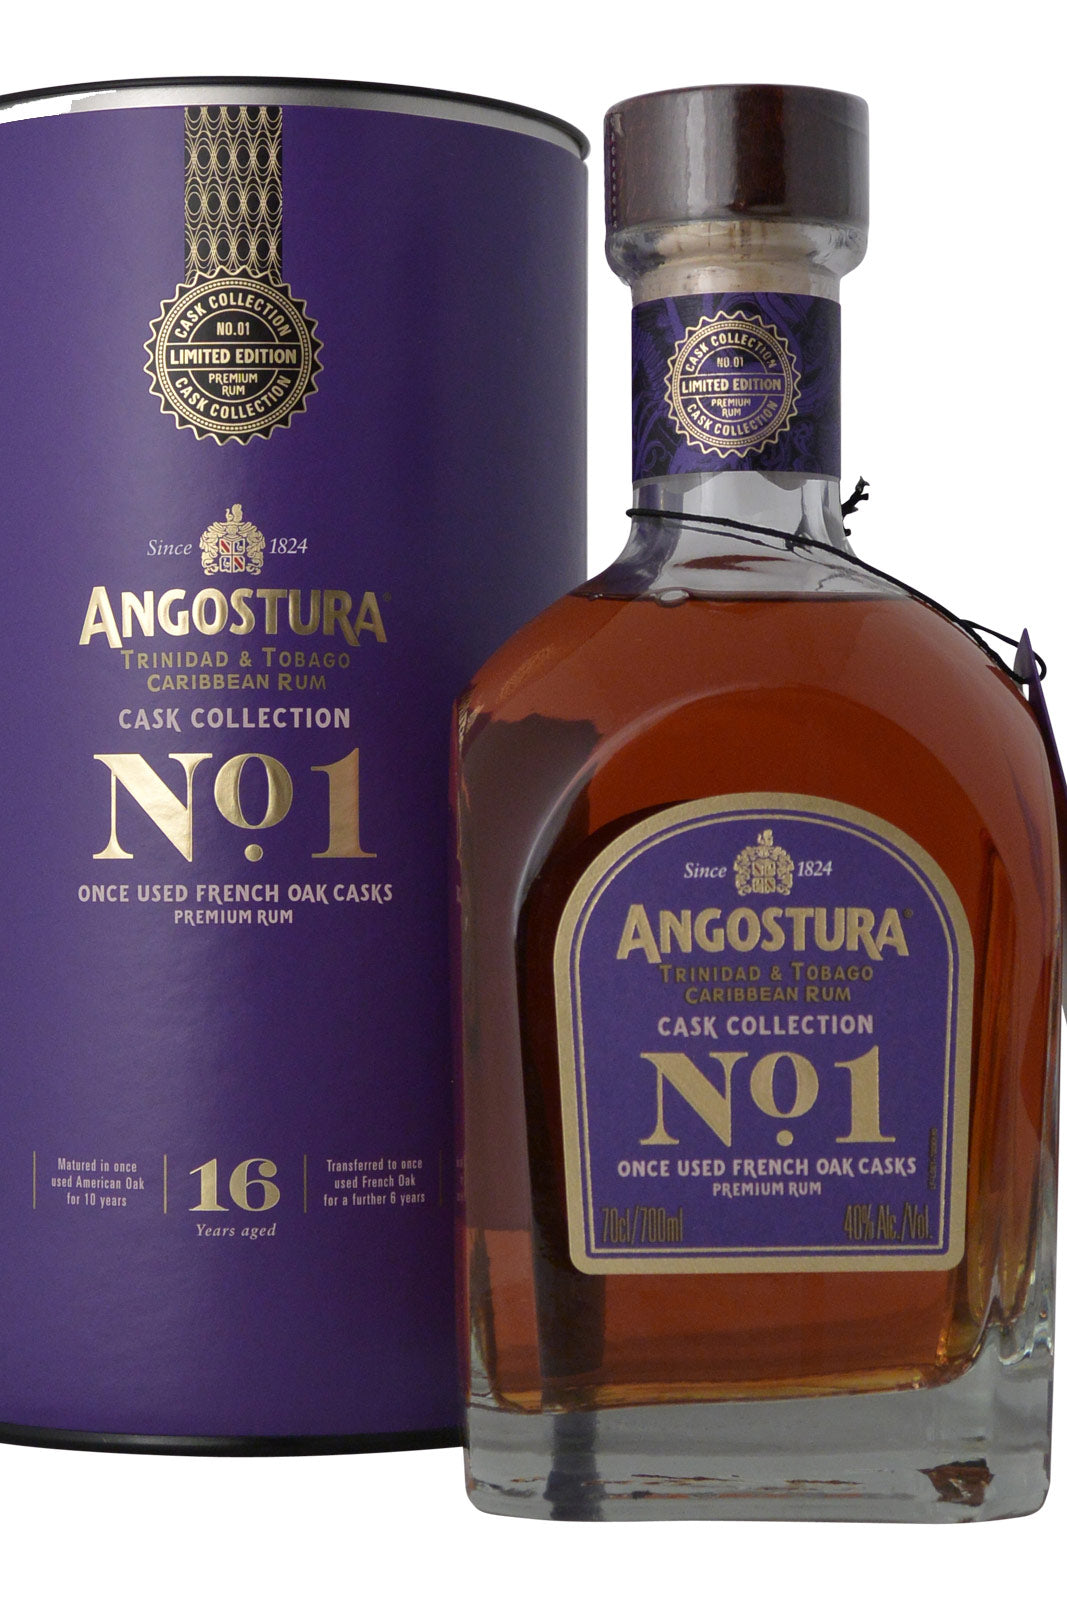 Angostura Rhum N°1 Cask Collection - Limited Edition 2015